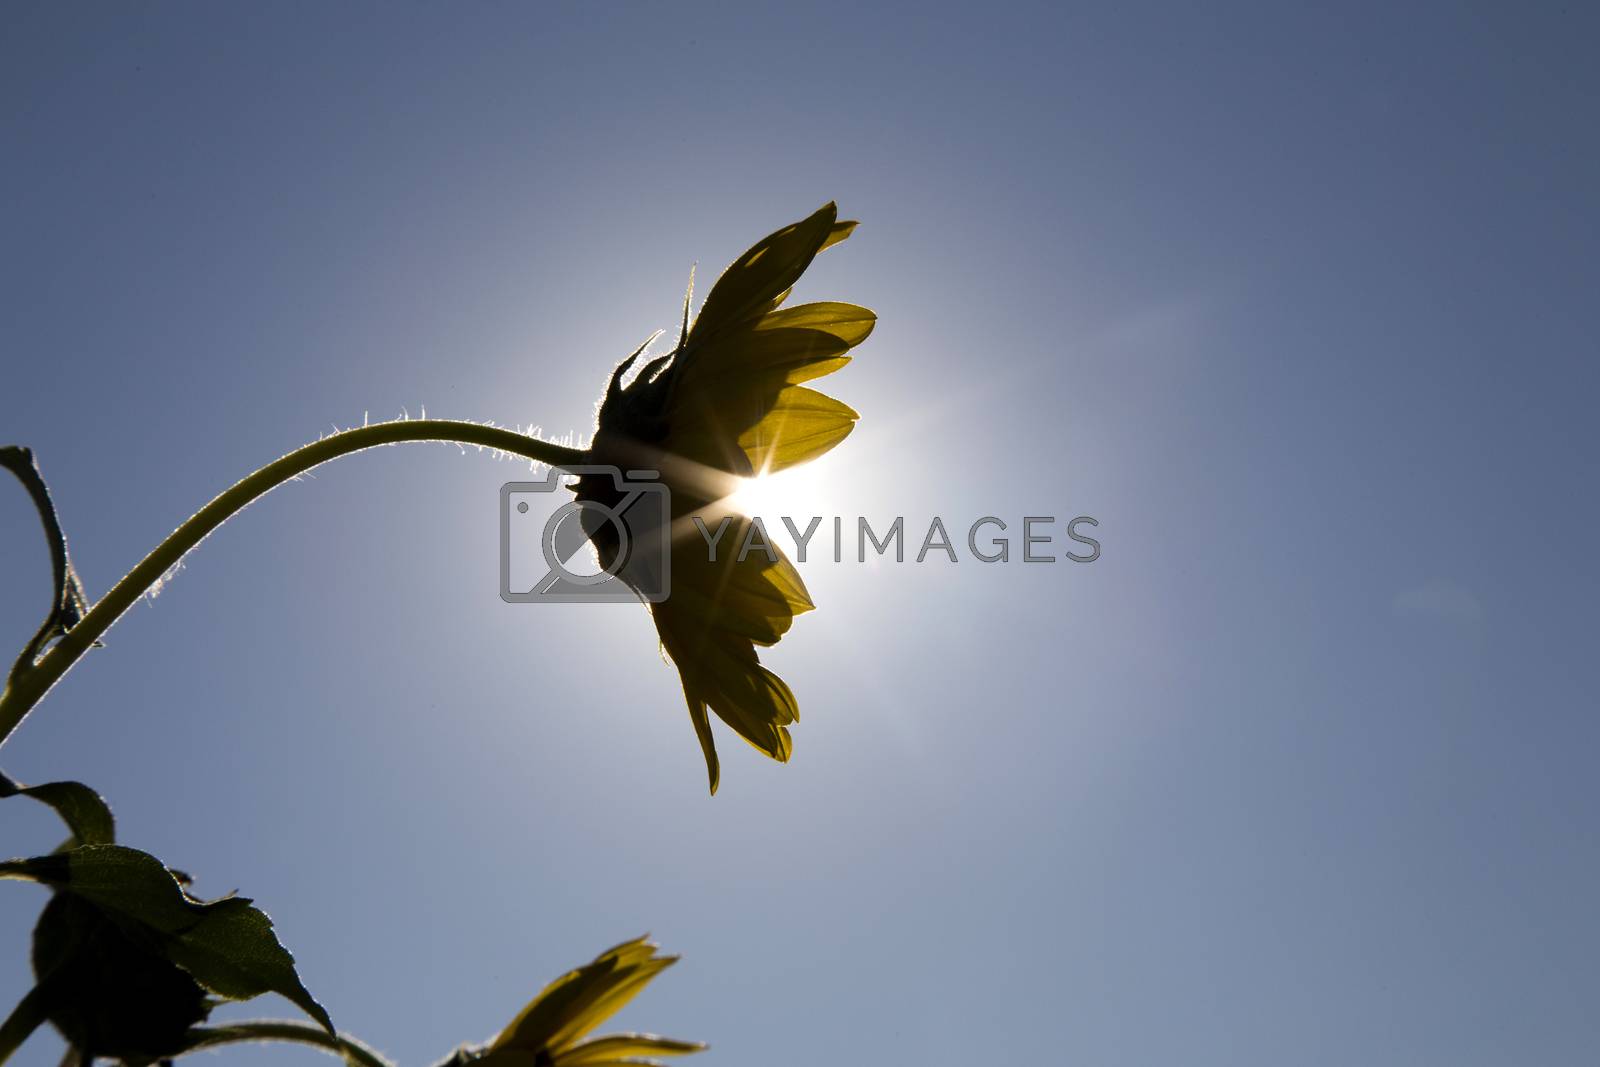 Royalty free image of Sunflower in Sun by pictureguy